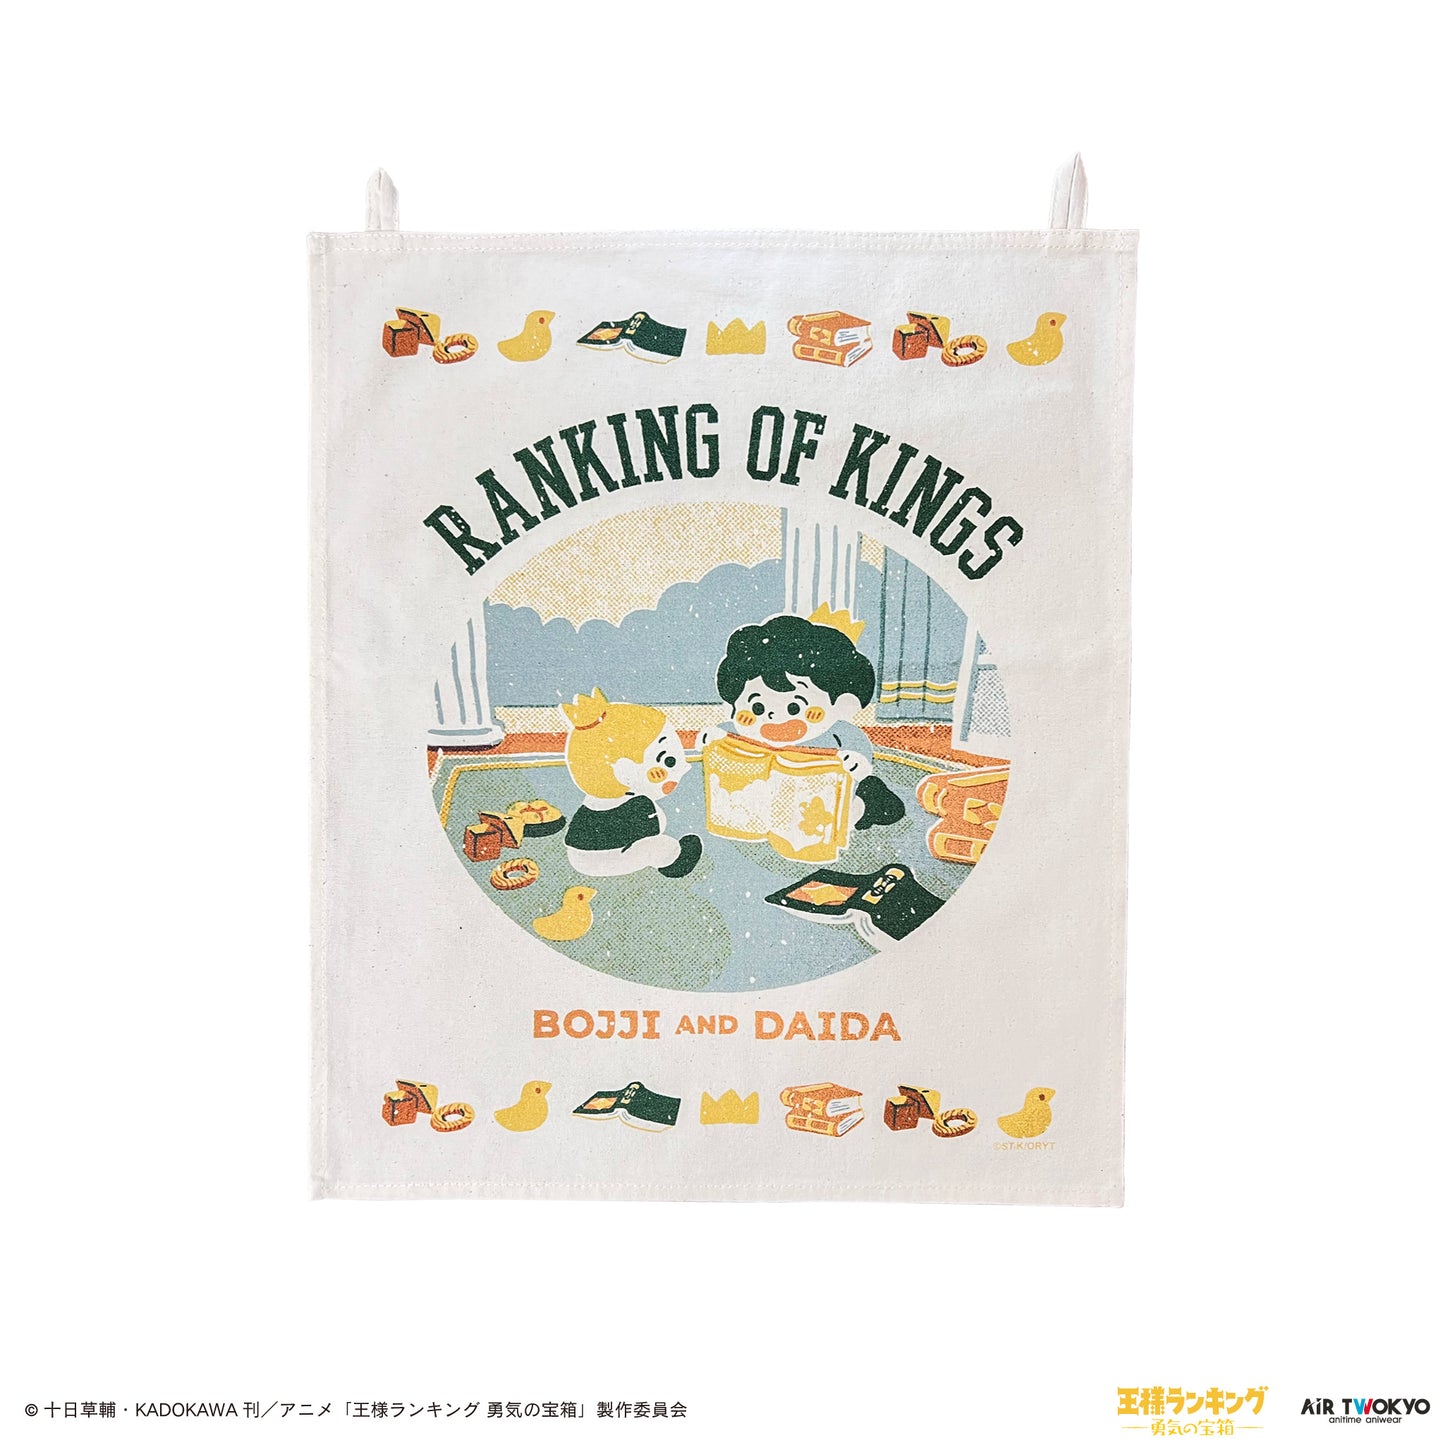 “Ranking of Kings: The Treasure Chest of Courage” Fabric Poster